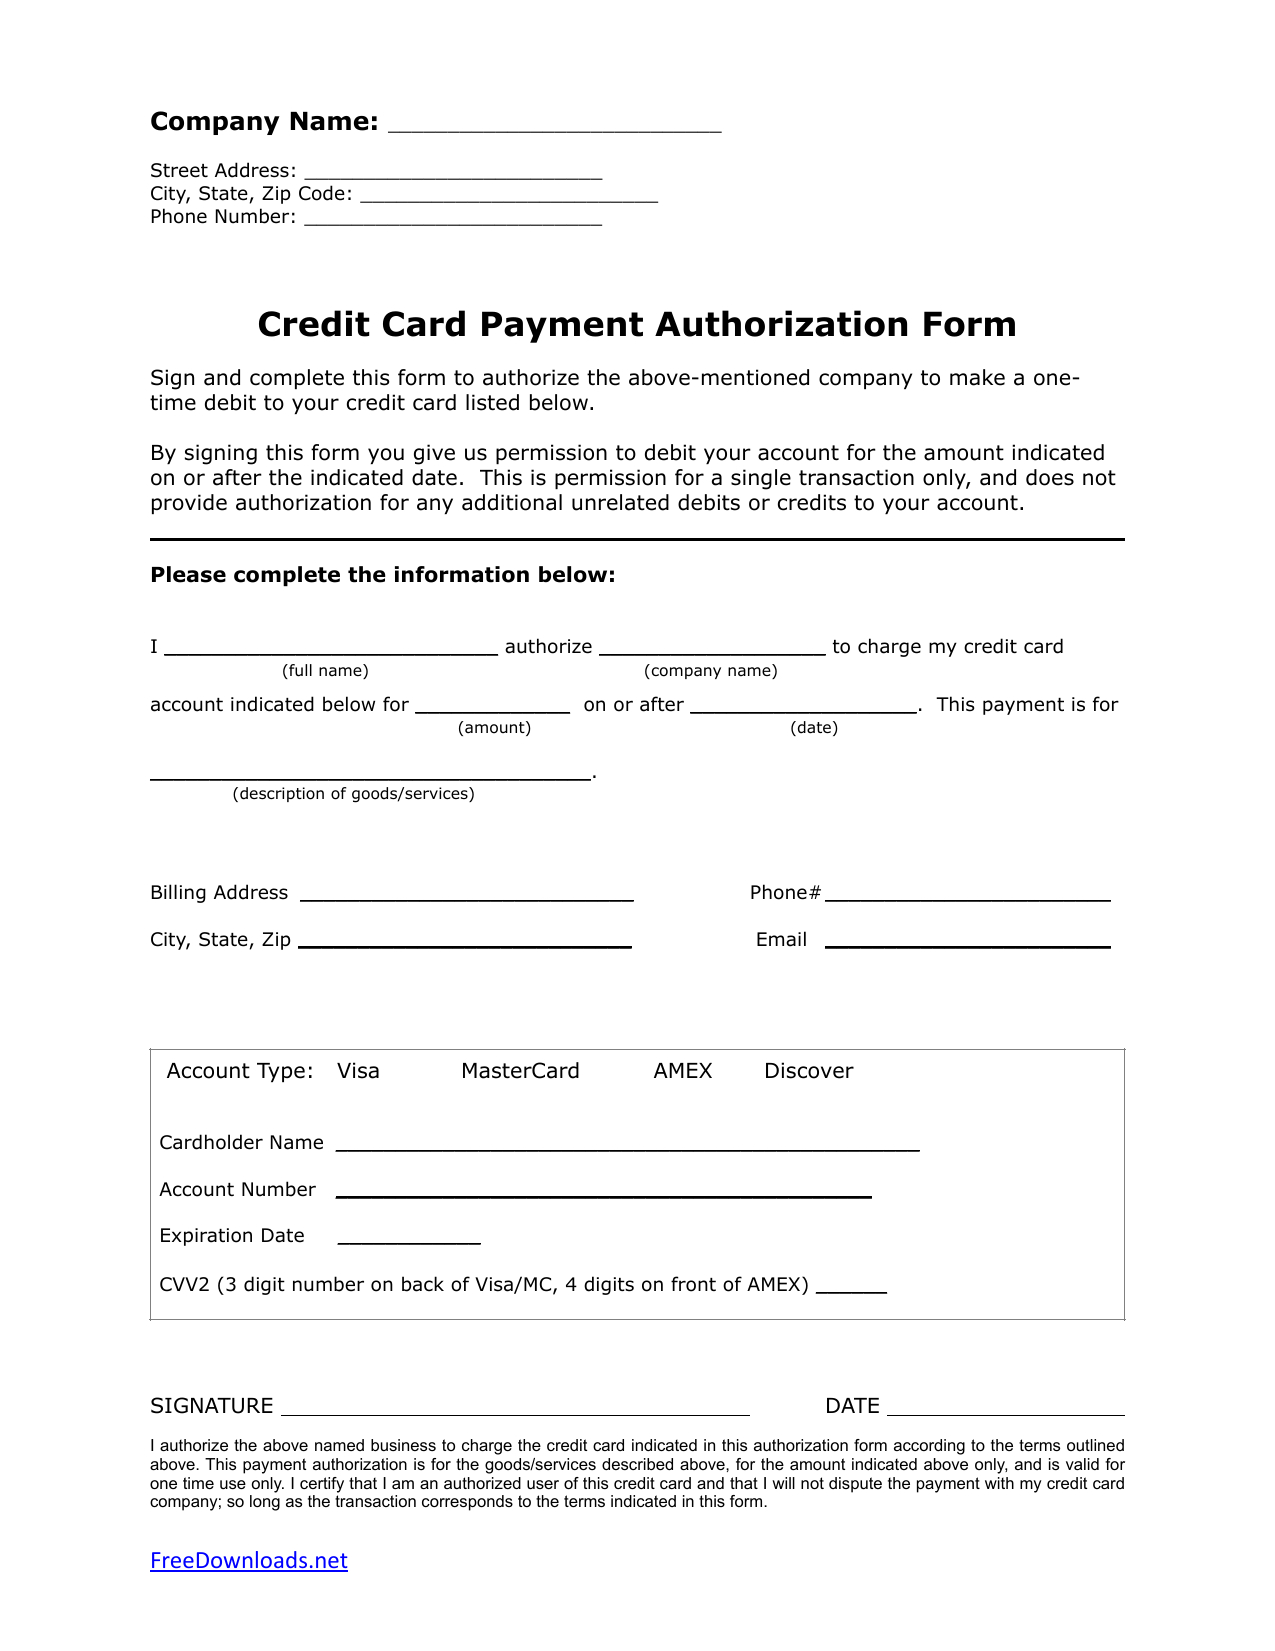 Download One (1) Time Credit Card Authorization Payment Form In Authorization To Charge Credit Card Template